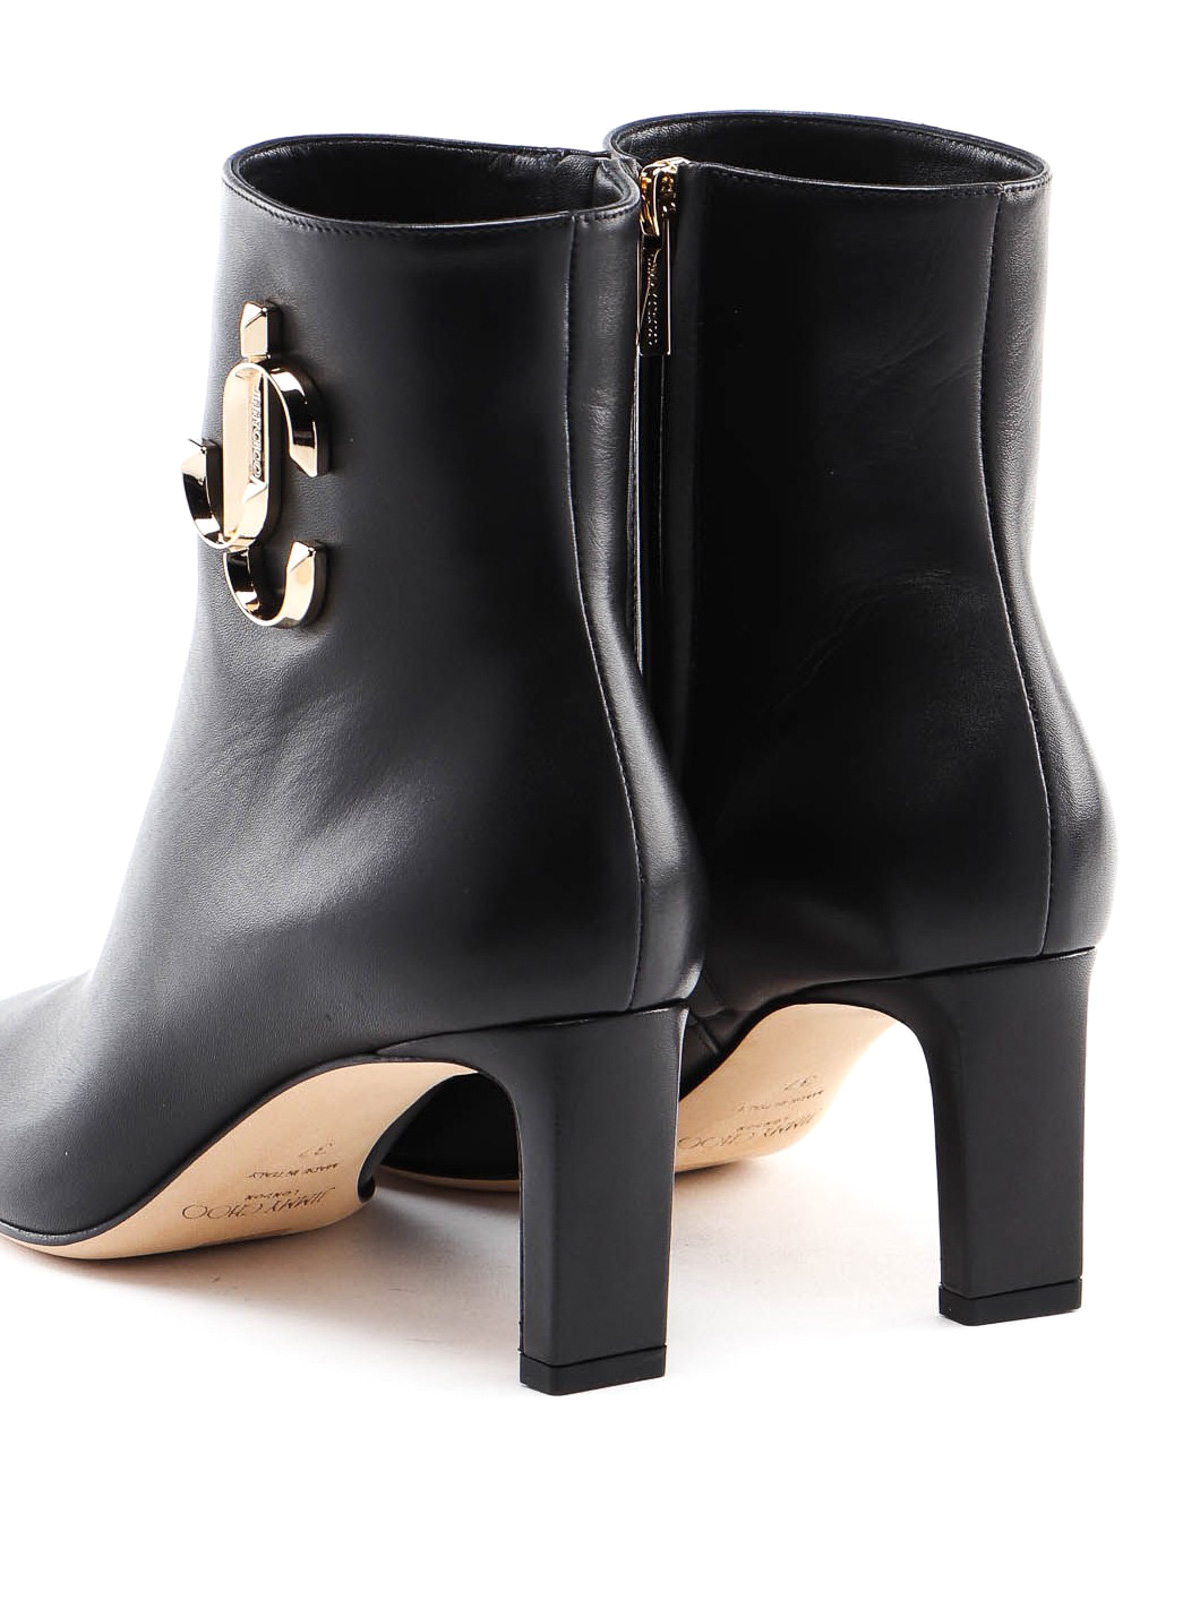 jimmy choo black ankle boots